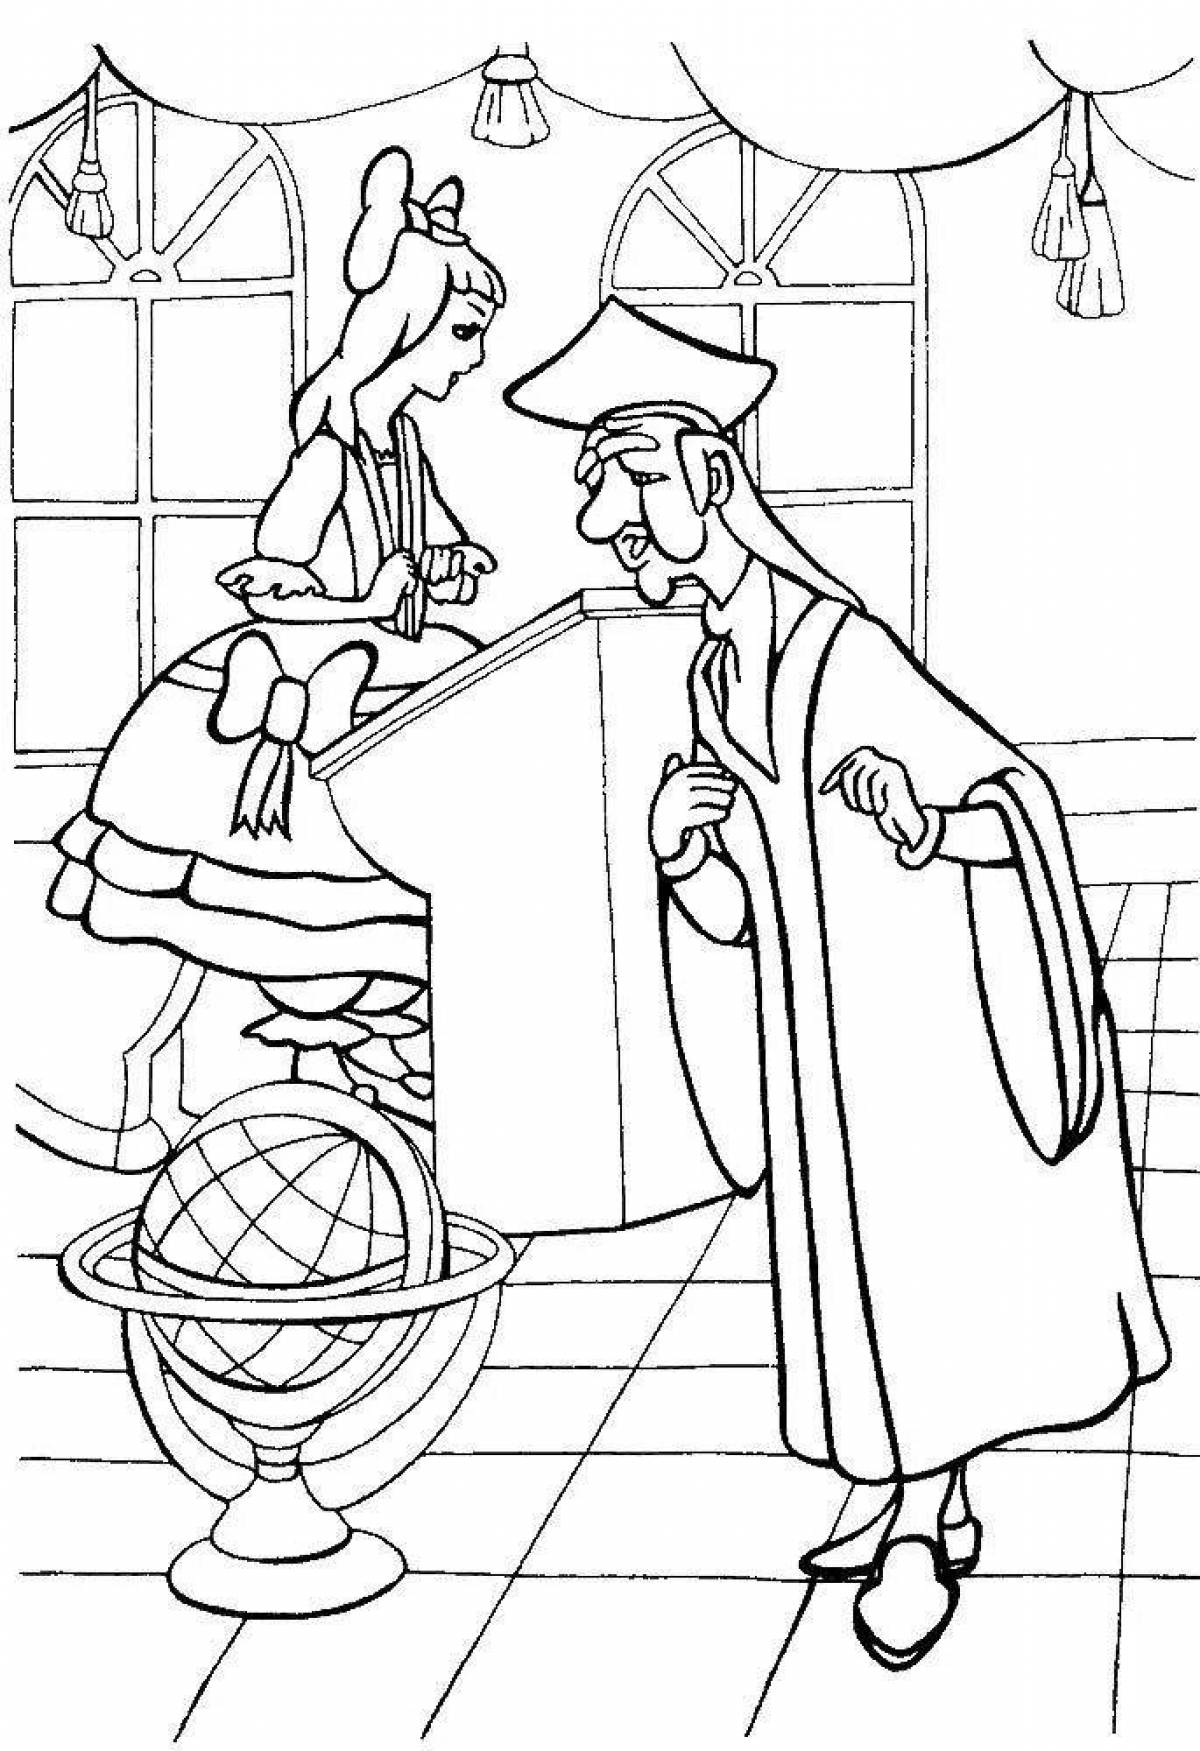 Innovative coloring page 12